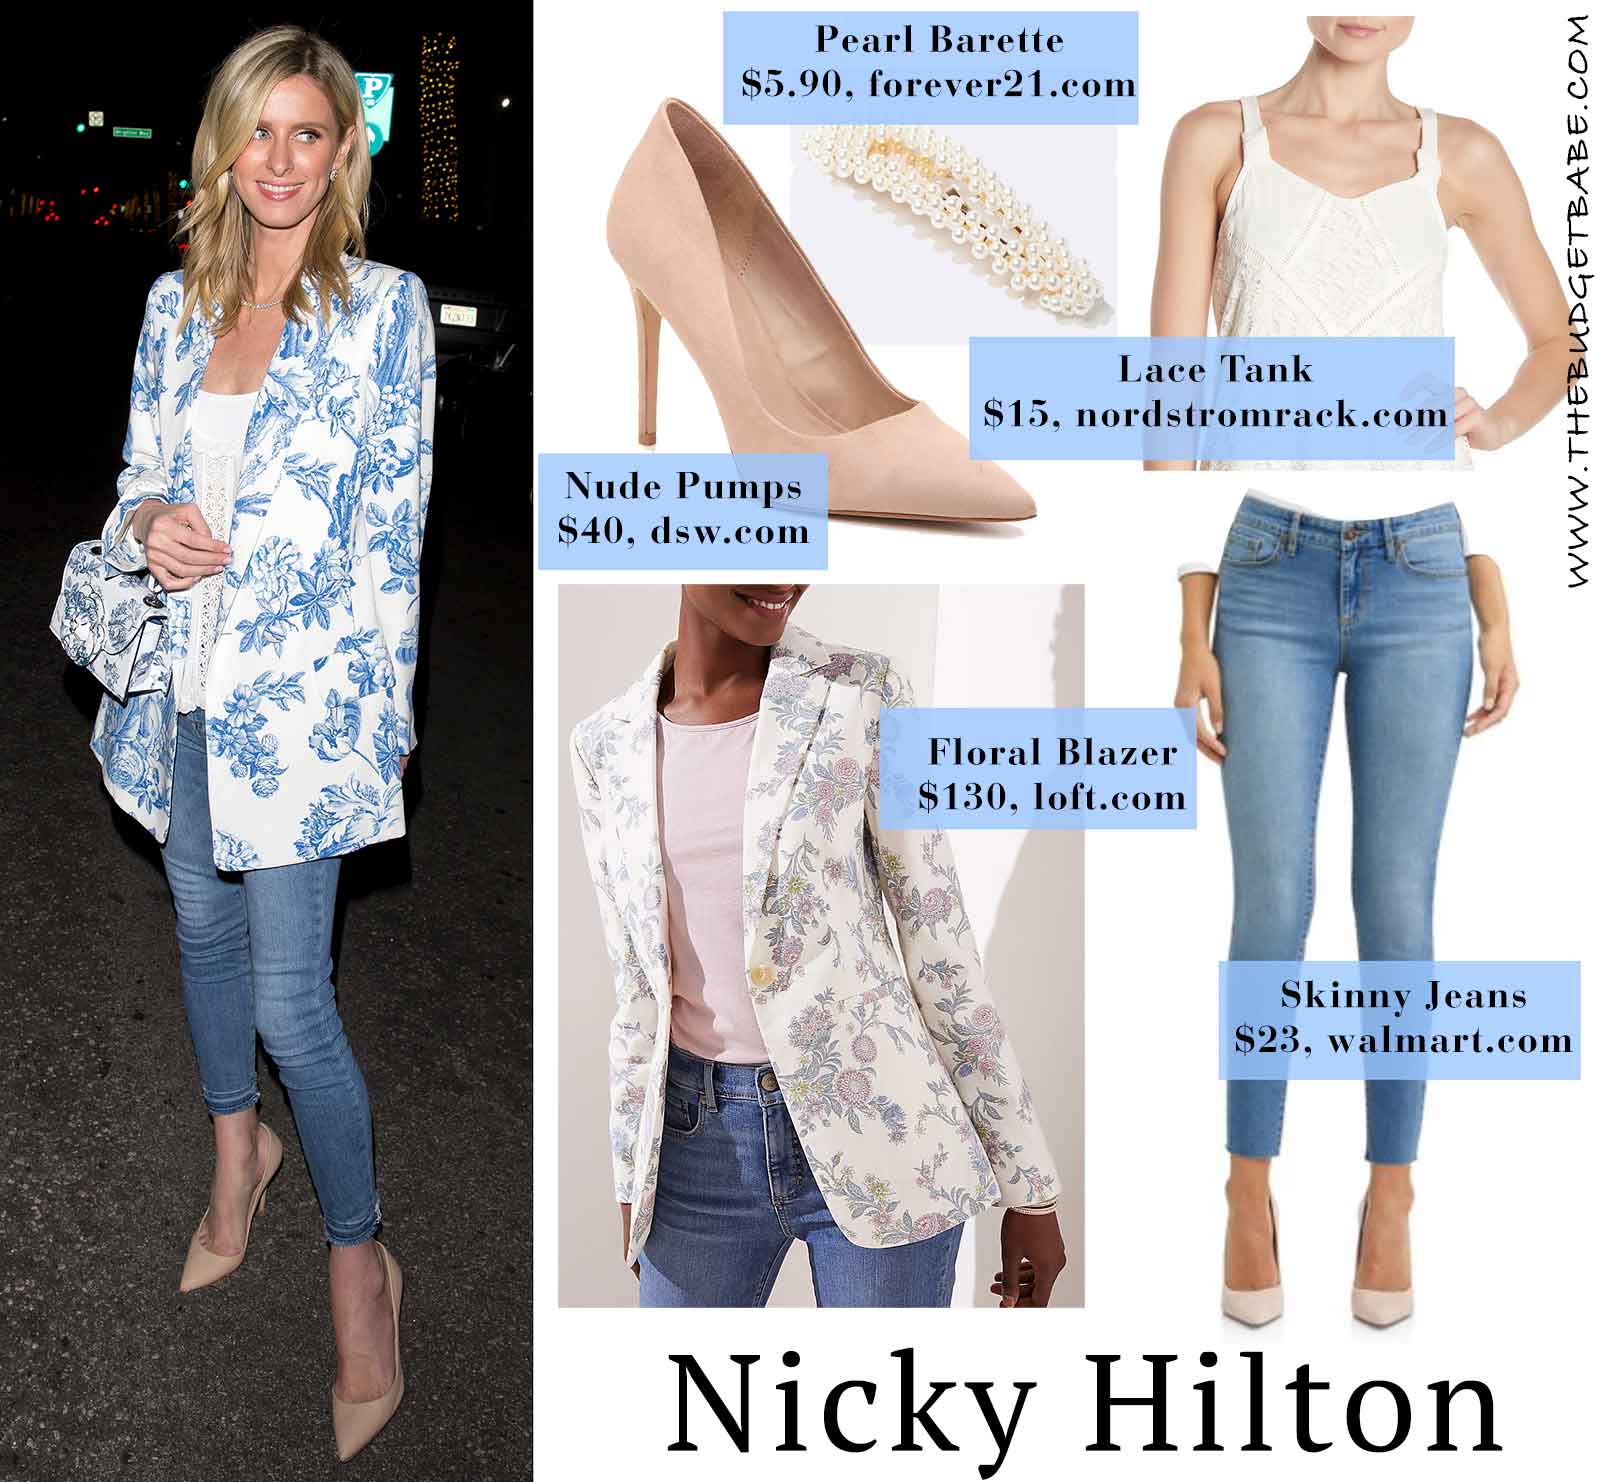 Nicky Hilton's floral blazer and nude pumps look for less